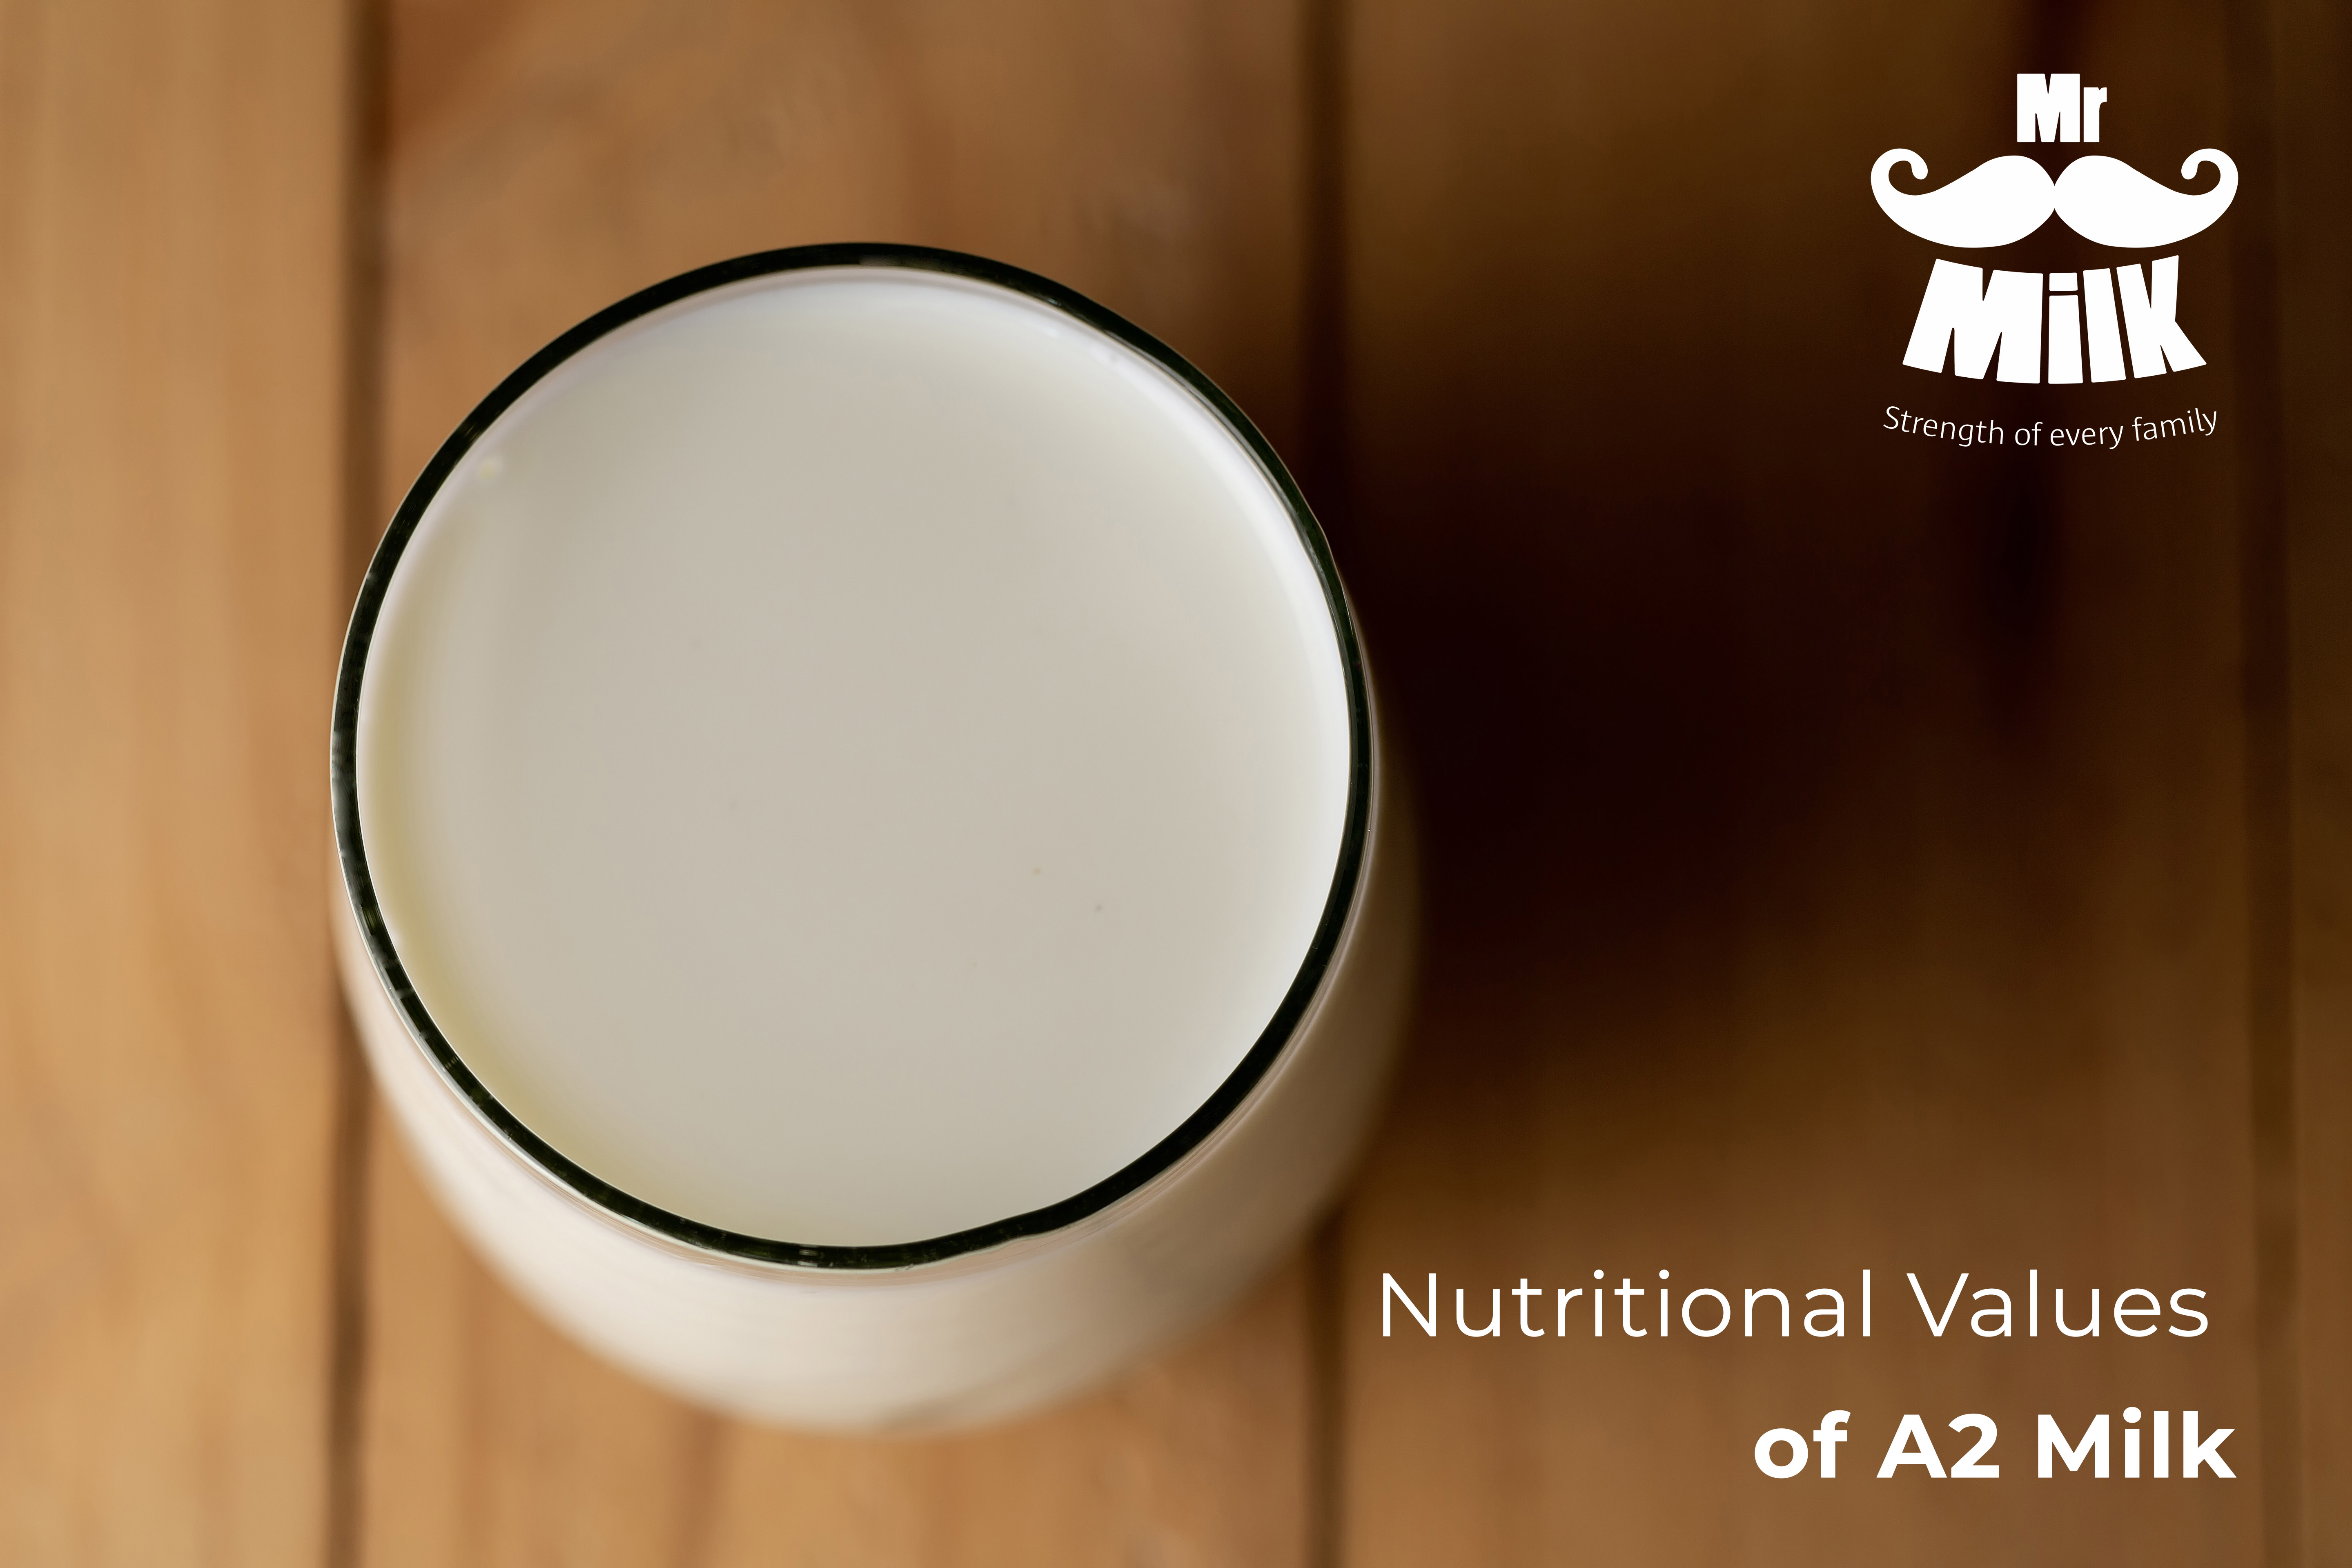 All You Need to Know about the Nutritional Values of A2 Milk